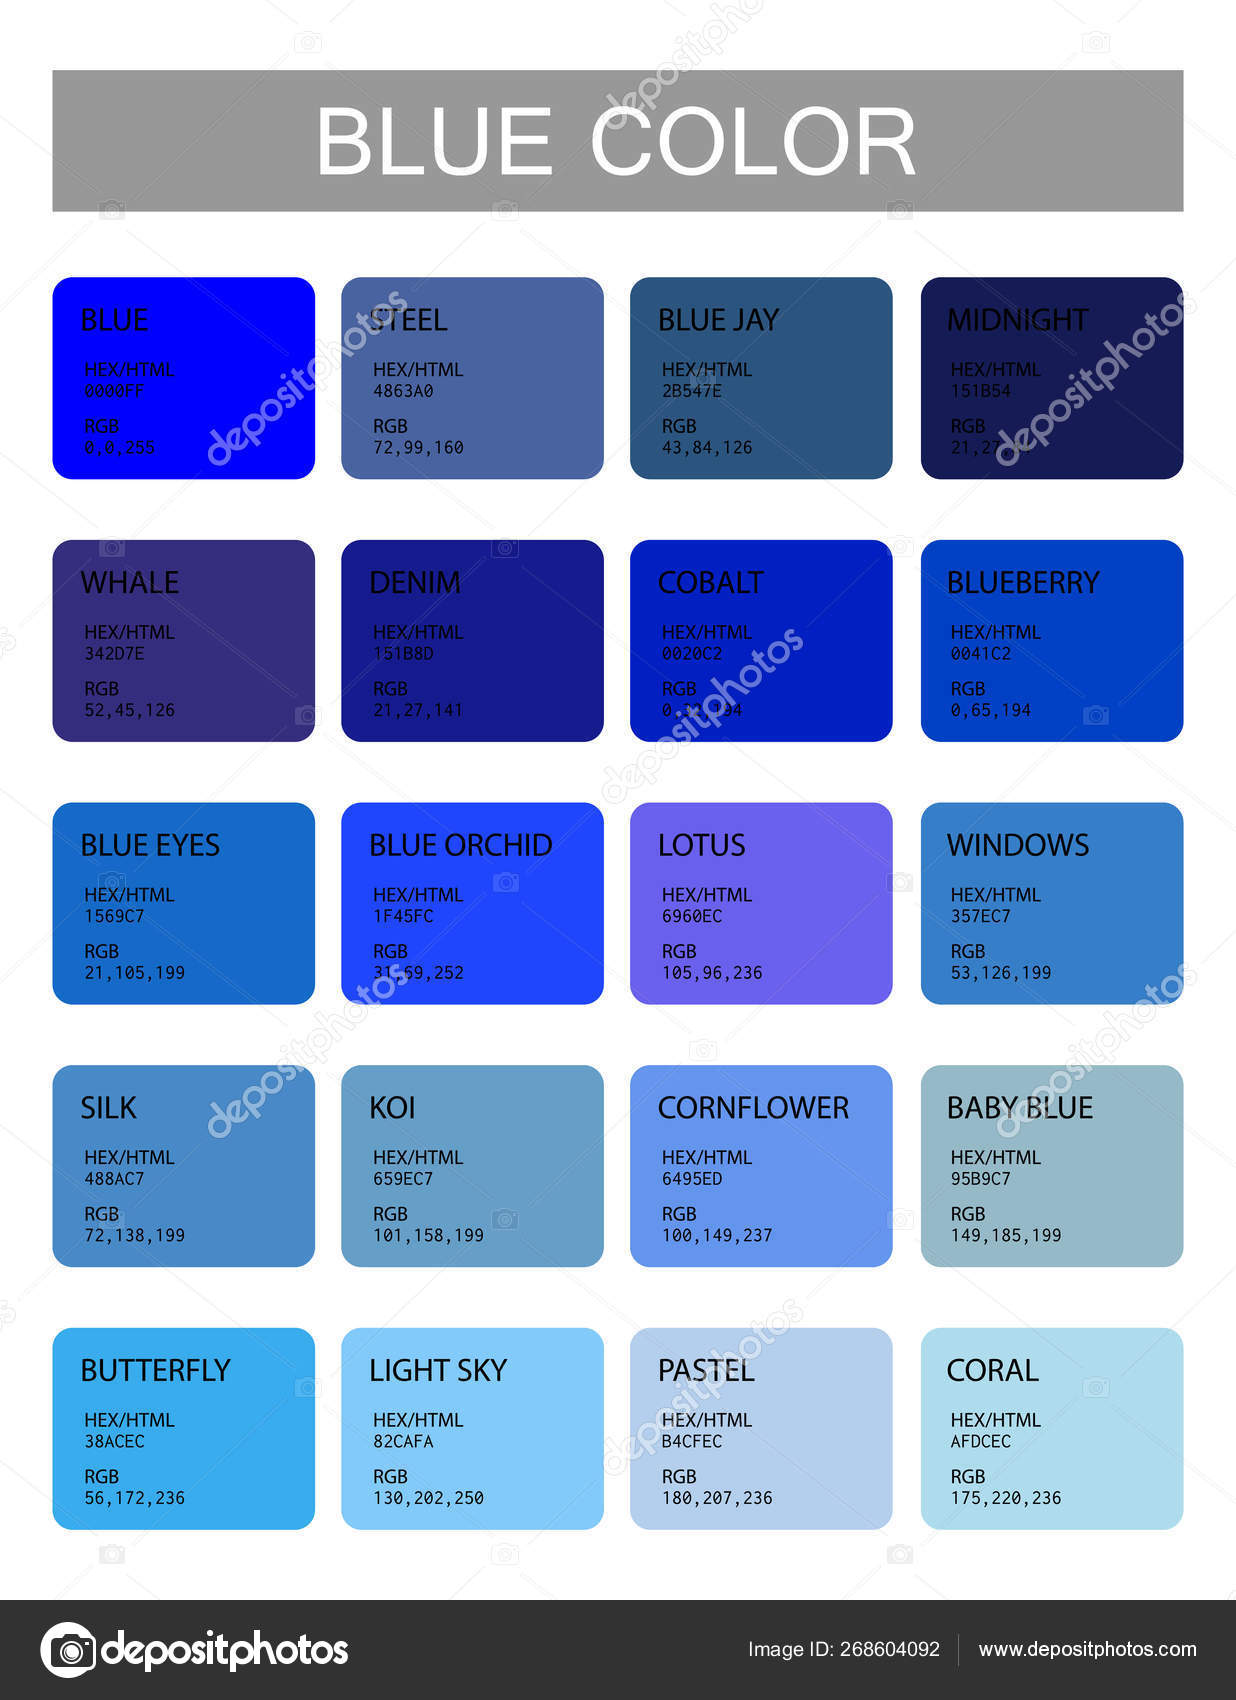 Blue Color Codes And Names Selection Of Colors For Design